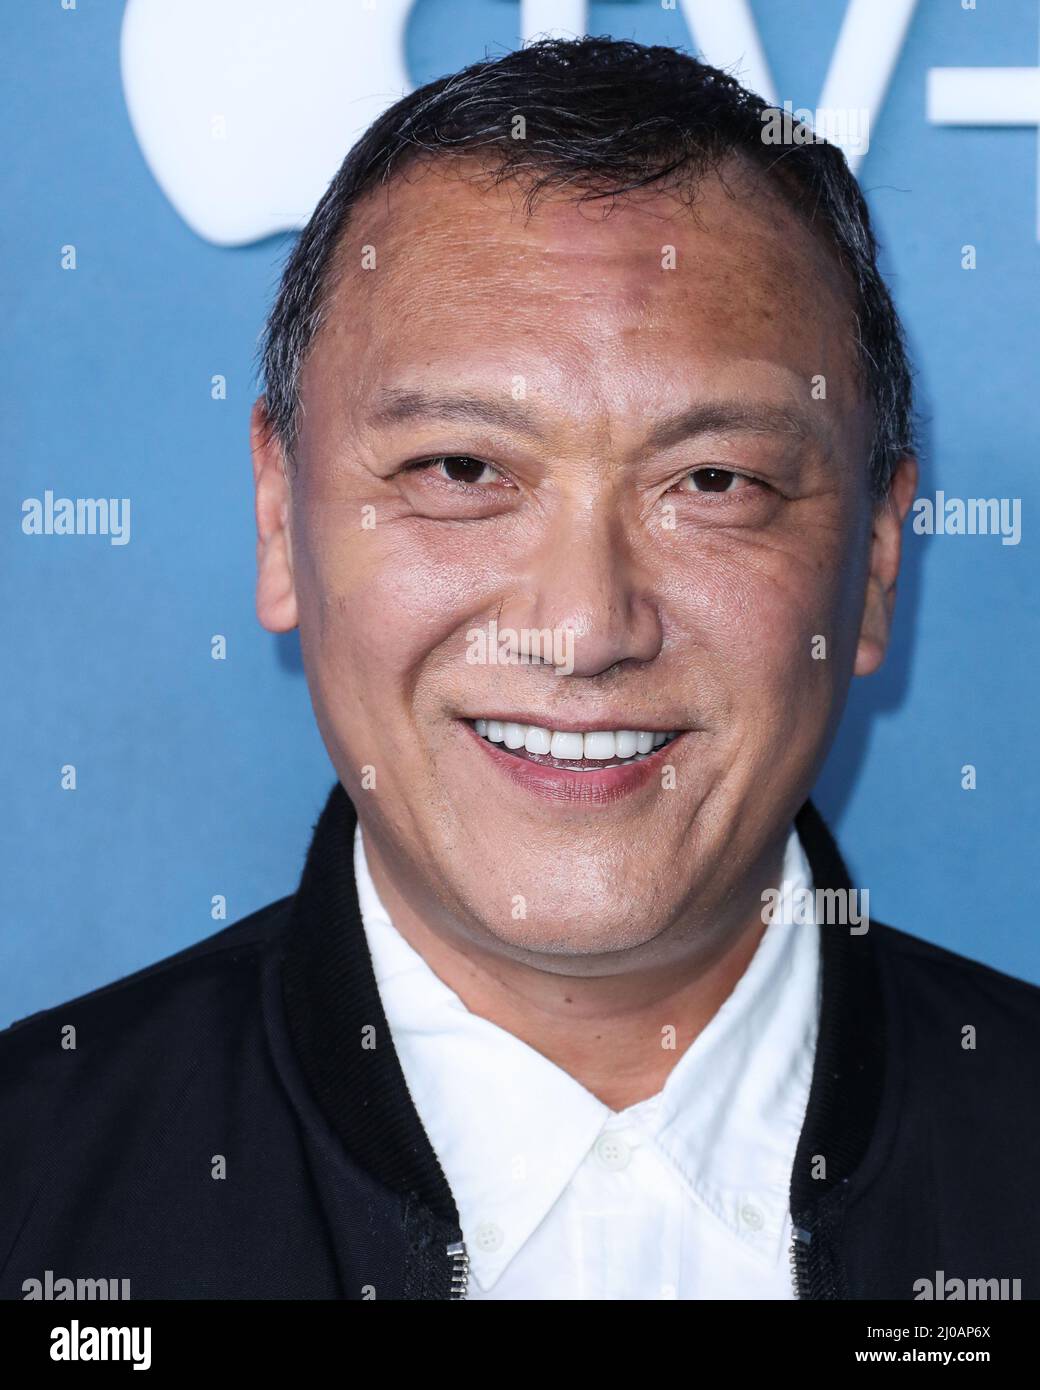 Los Angeles, United States. 17th Mar, 2022. LOS ANGELES, CALIFORNIA, USA - MARCH 17: Joe Zee arrives at the Global Premiere Of Apple TV 's 'WeCrashed' held at the Academy Museum of Motion Pictures on March 17, 2022 in Los Angeles, California, United States. (Photo by Xavier Collin/Image Press Agency/Sipa USA) Credit: Sipa USA/Alamy Live News Stock Photo